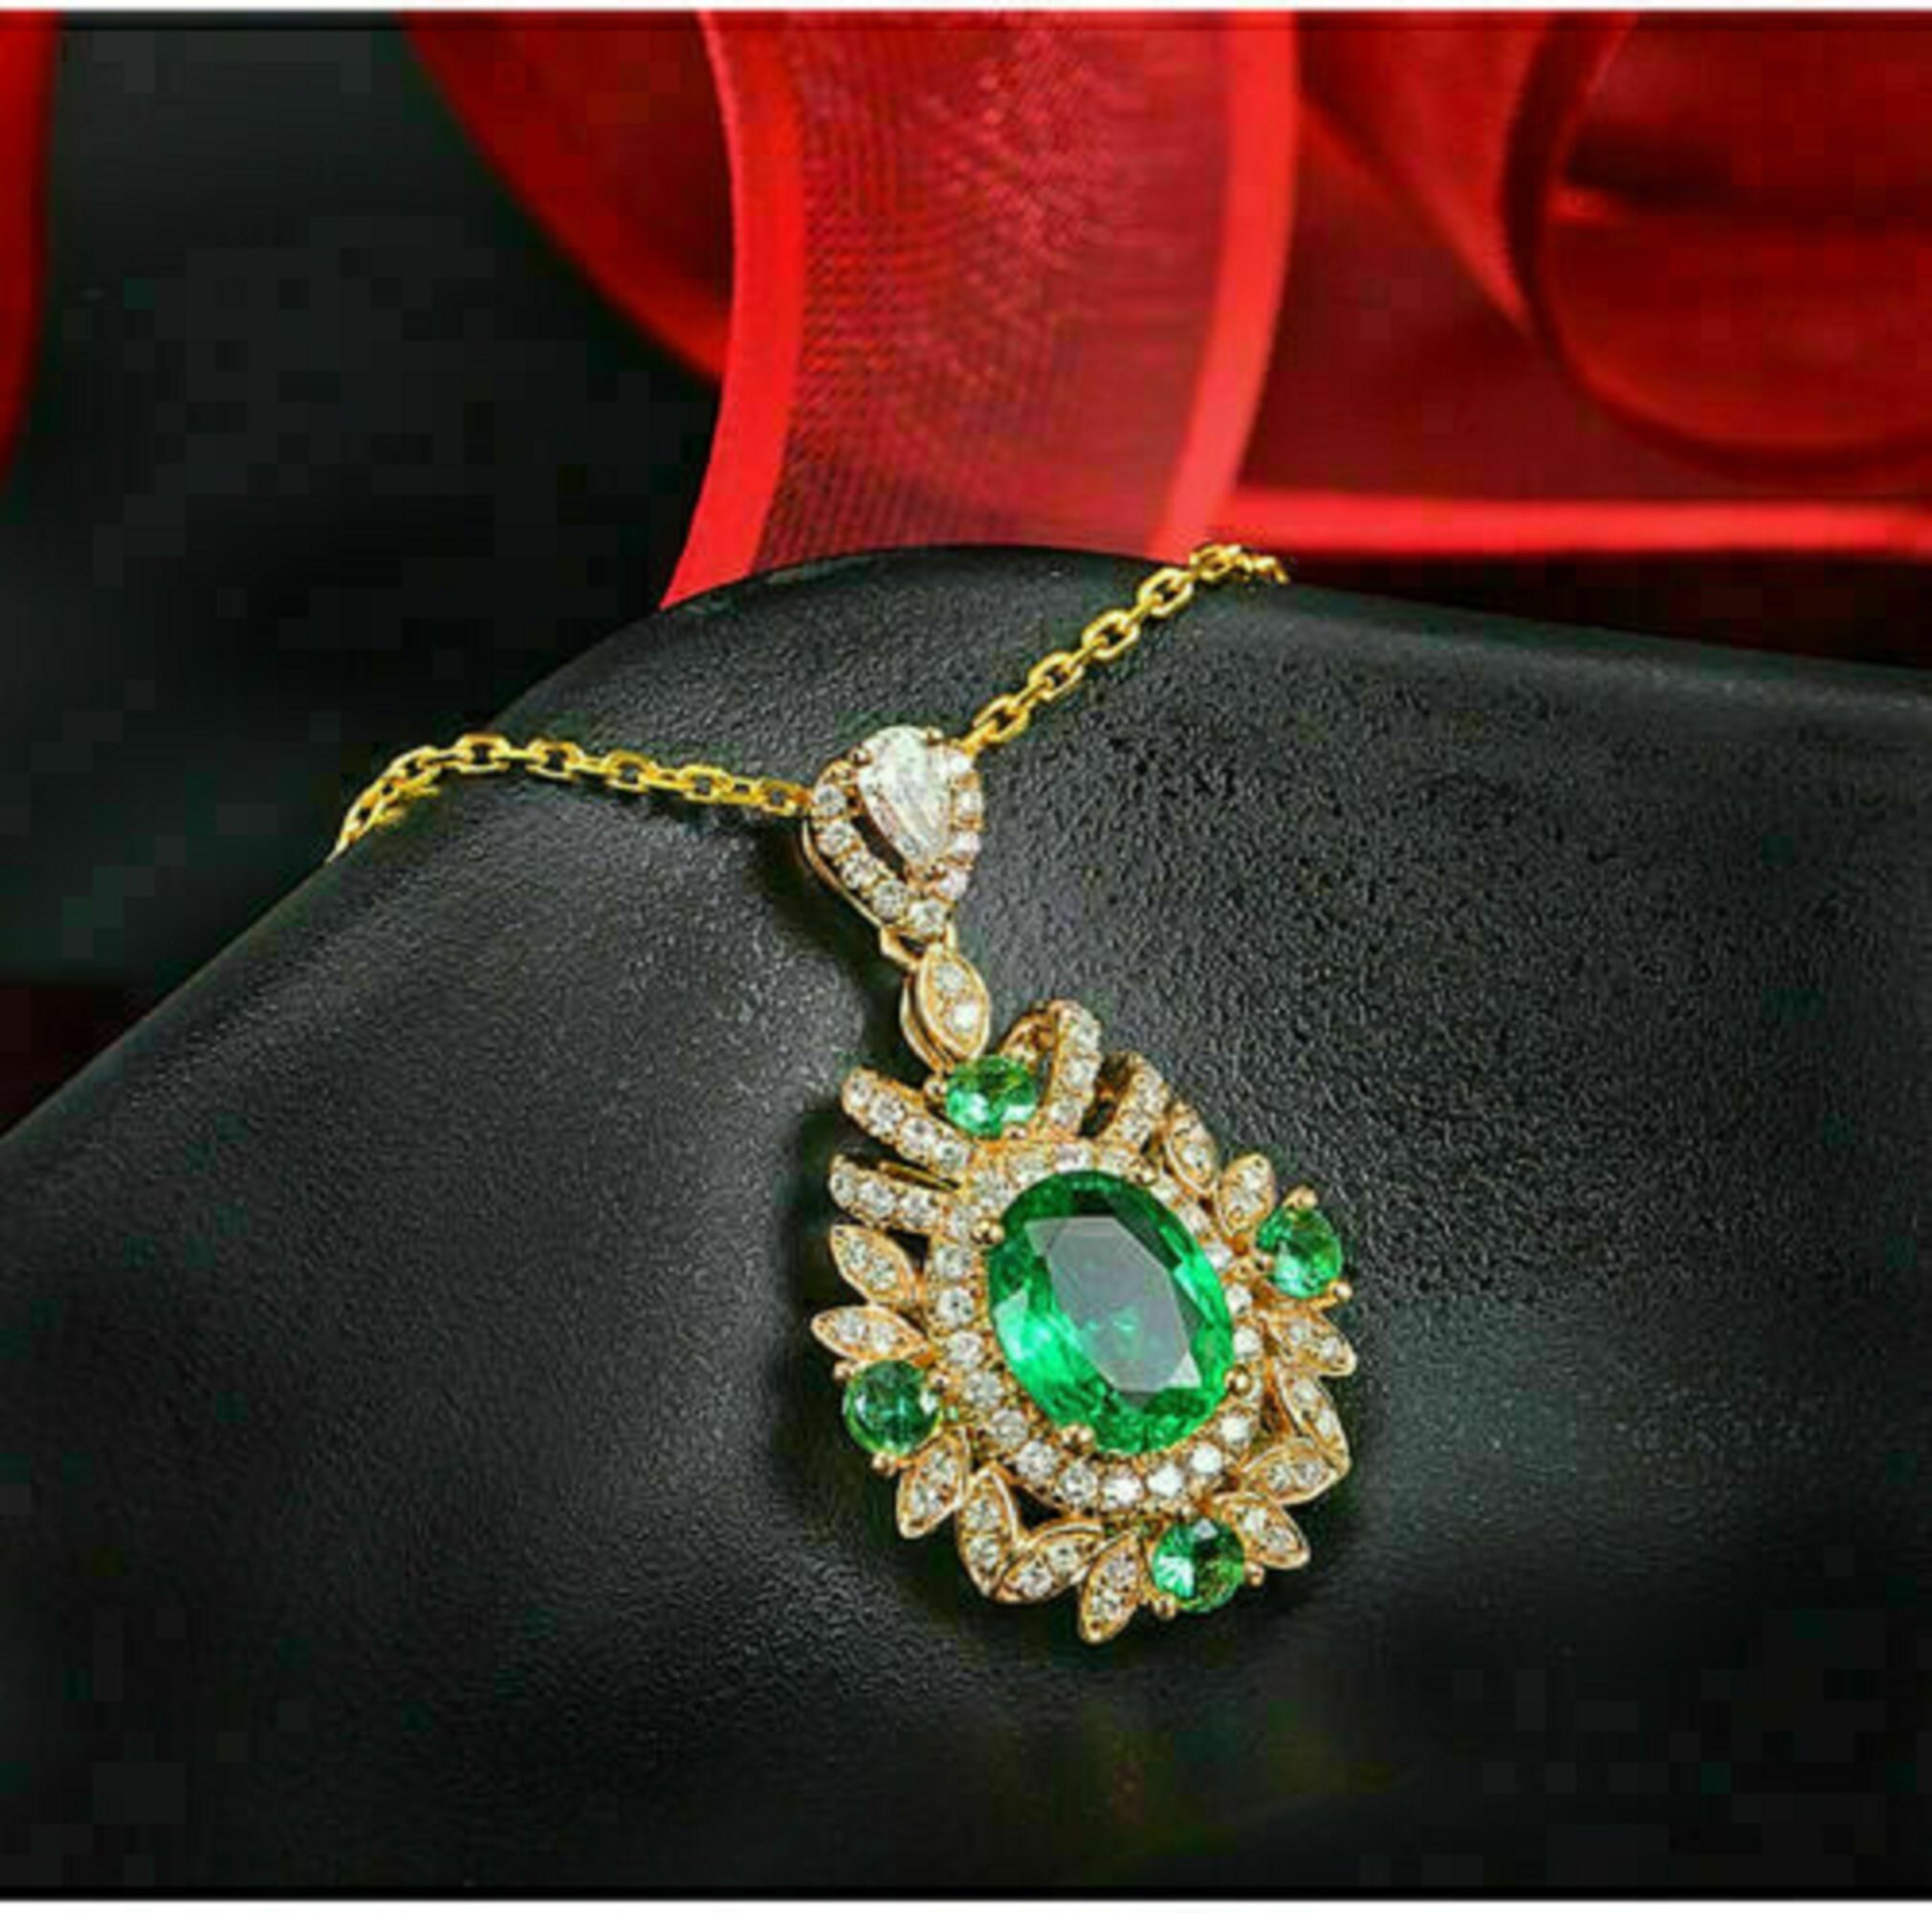 14K YELLOW OR ROSE GOLD 1/2CT OVAL EMERALD AND HALO DIAMOND PENDANT W/18" CHAIN 